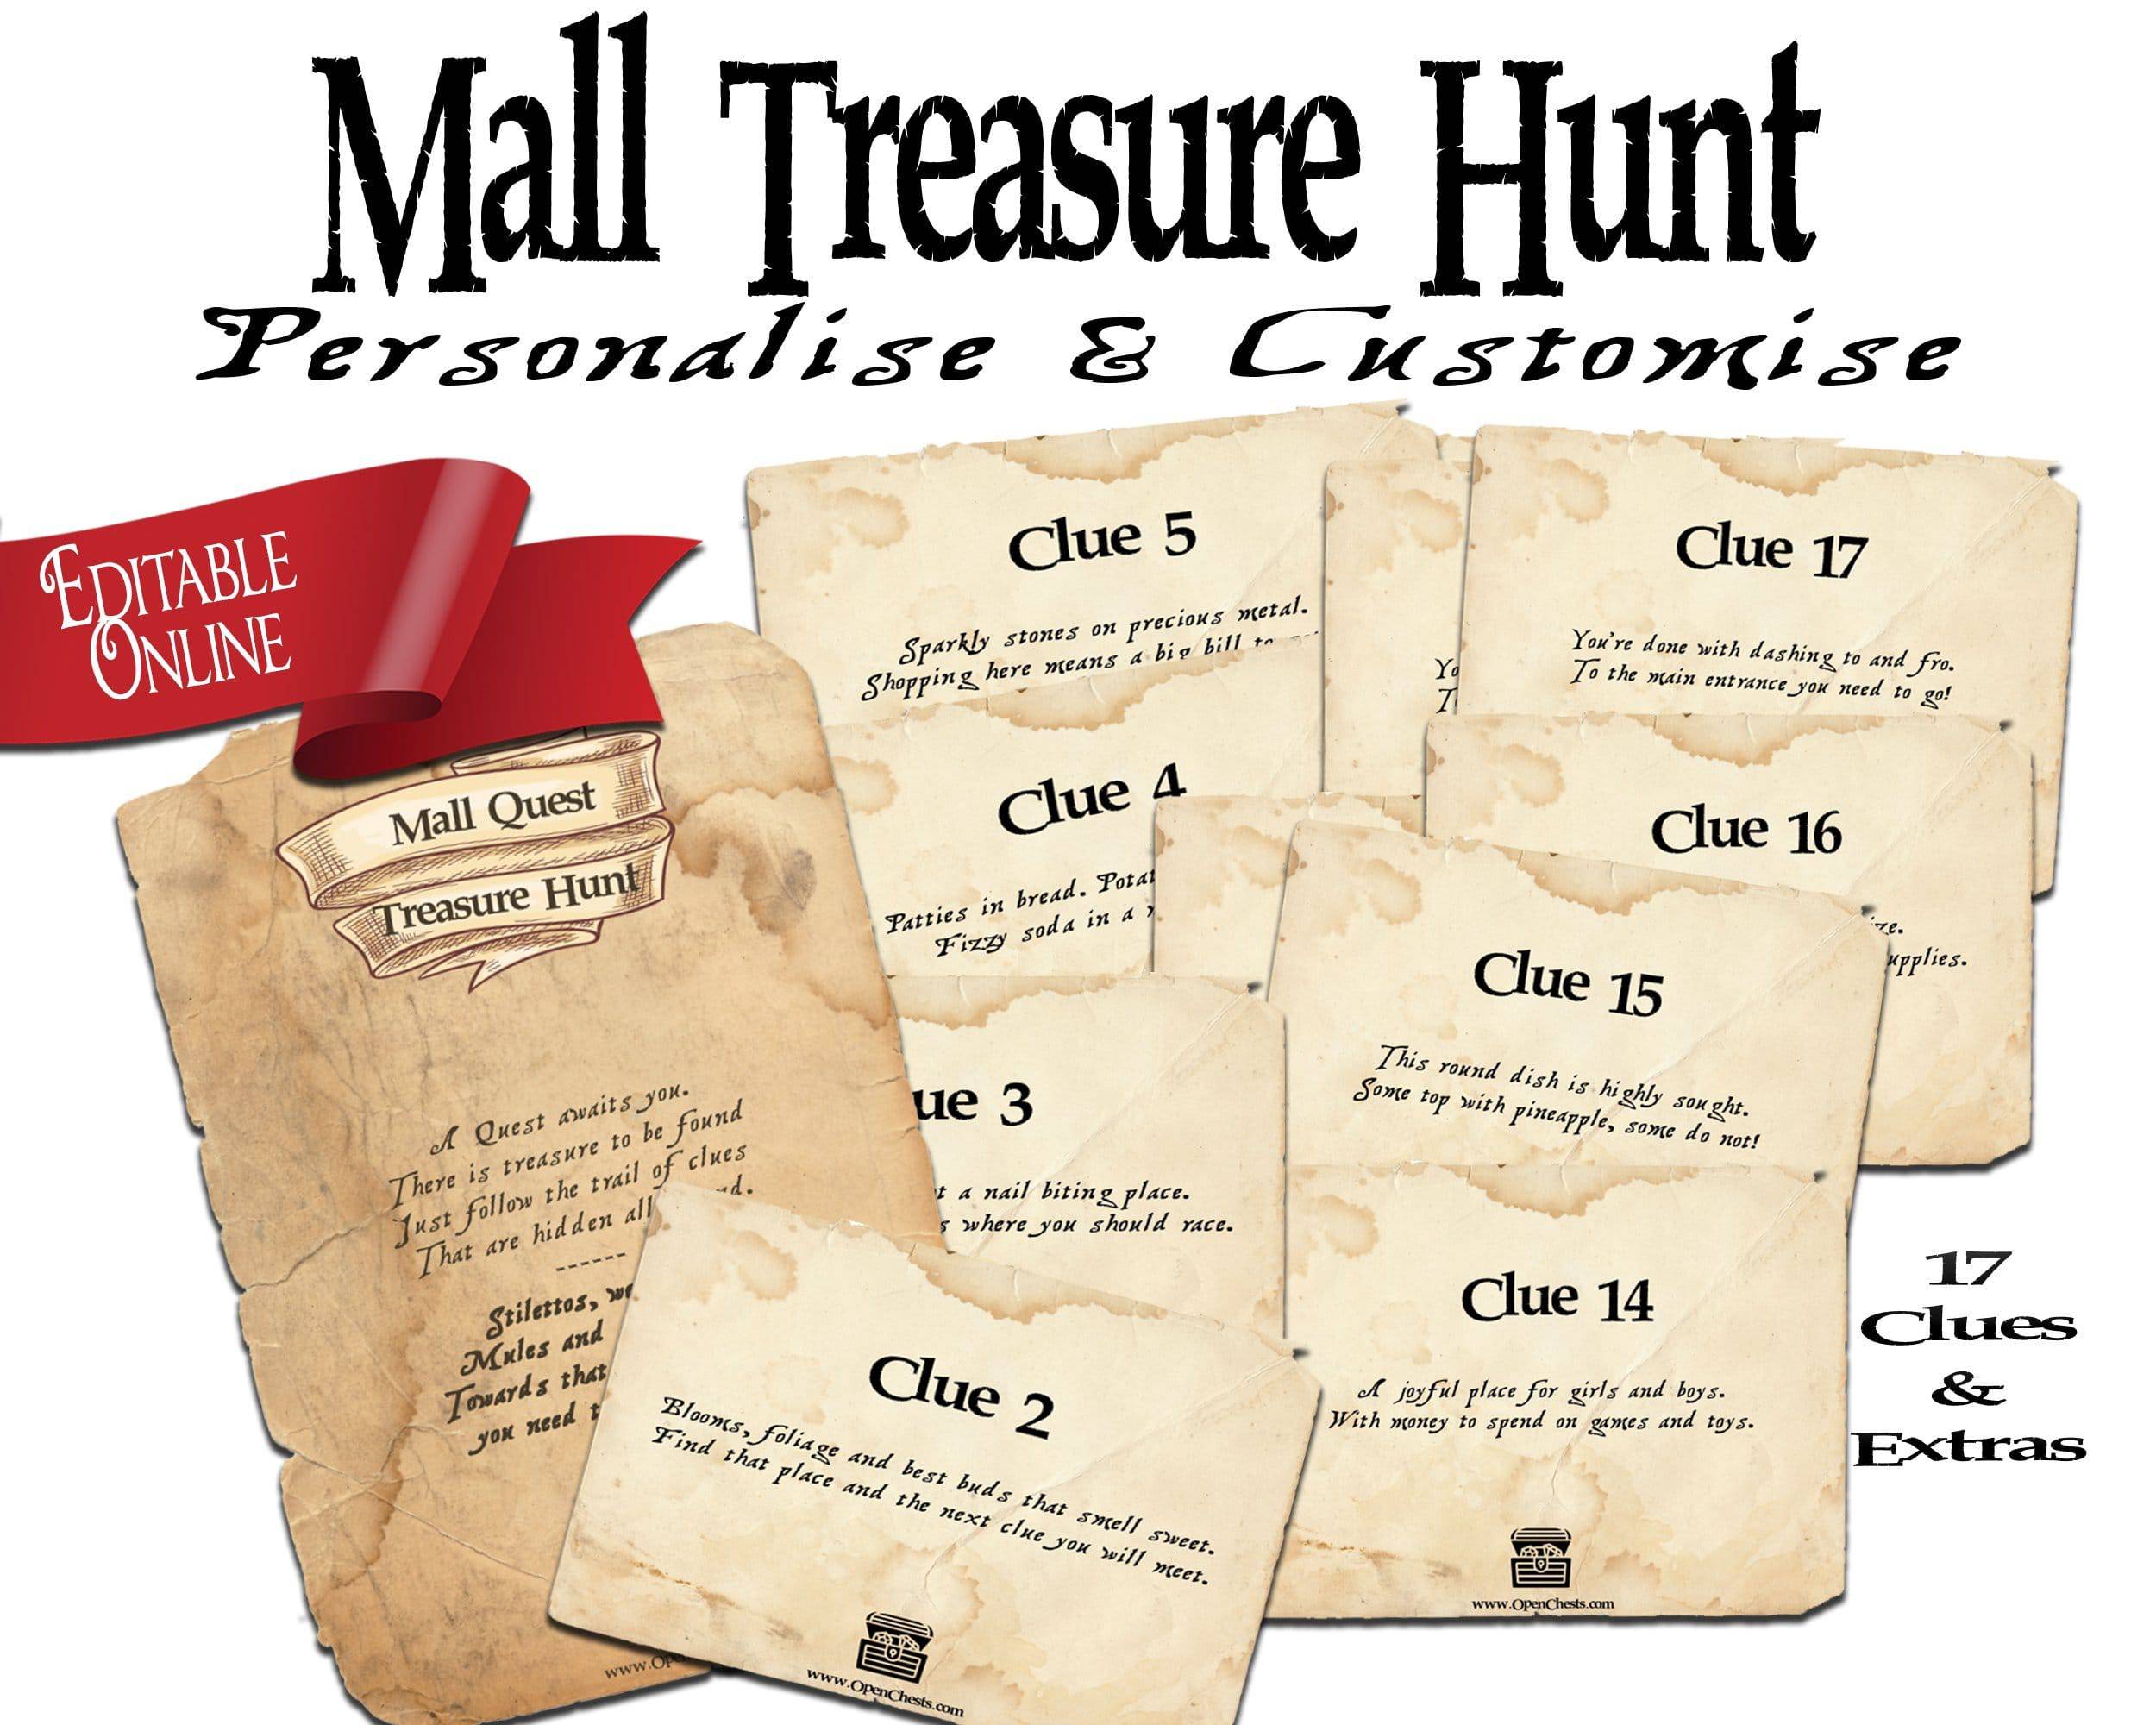 Mall Photo Scavenger Hunt | Mall Treasure Hunt Riddles Clues - Open Chests